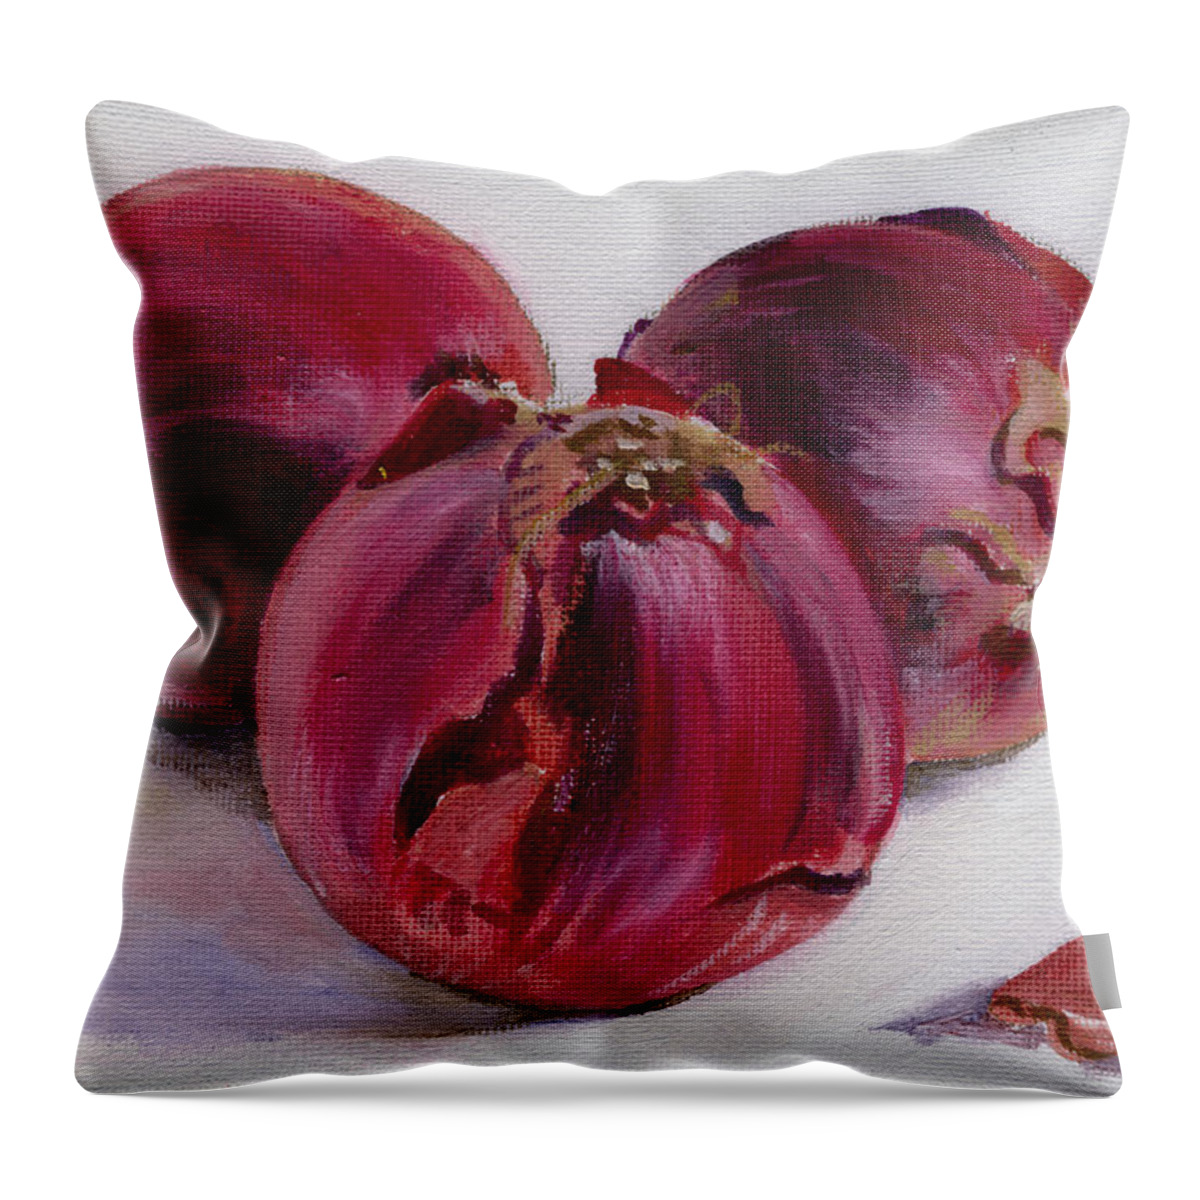 Still-life Throw Pillow featuring the painting Three More Onions by Sarah Lynch